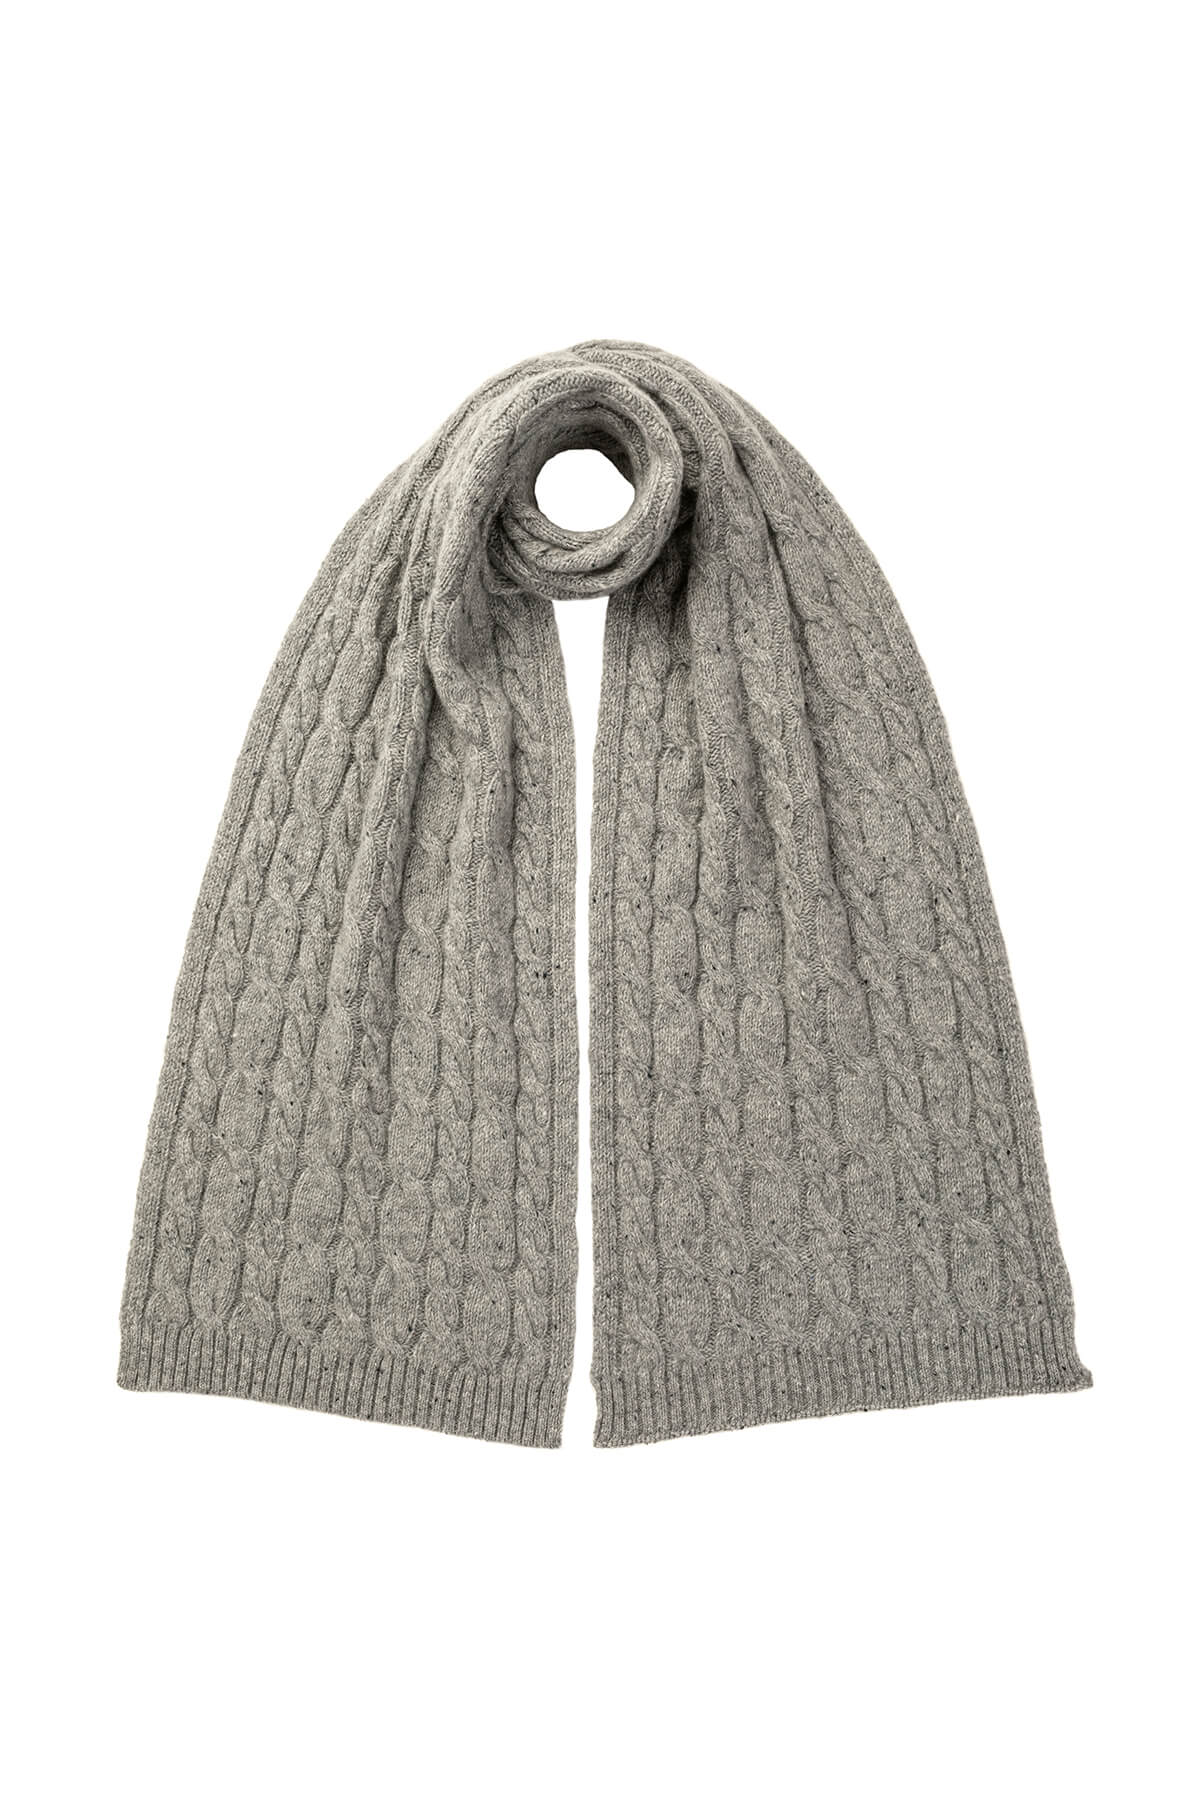 Johnstons of Elgin’s Light grey Donegal Cashmere Donegal Cable Scarf on a white background HAC03311002674